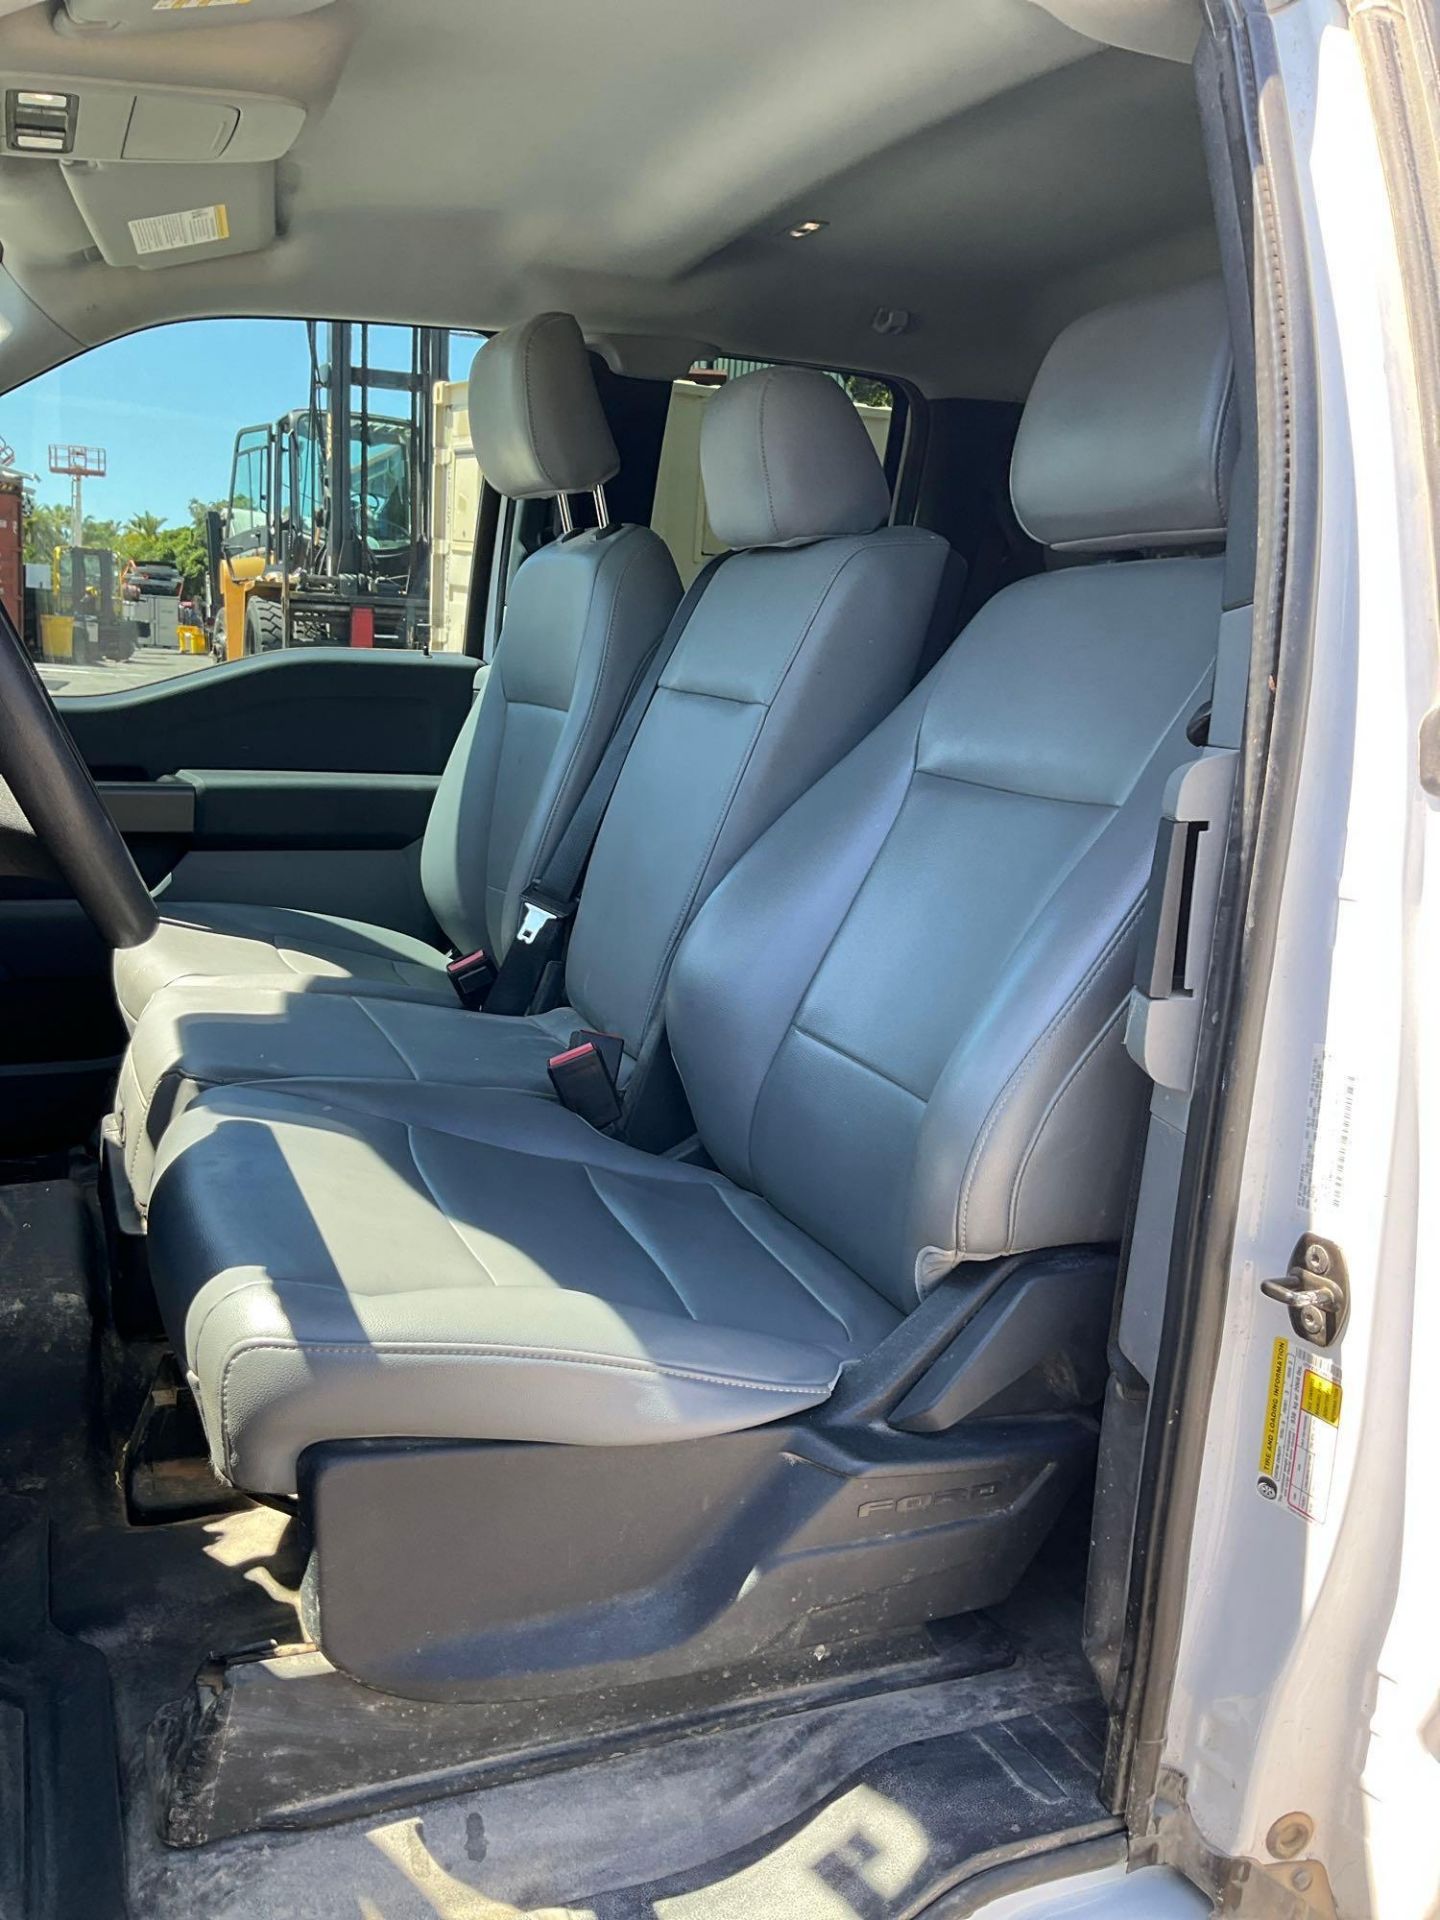 2021FORD F-150 XL PICKUP TRUCK, GAS POWER AUTOMATIC, APPROX GVWR7050, 4X4, POWER LOCKS & WINDOWS , - Image 11 of 22